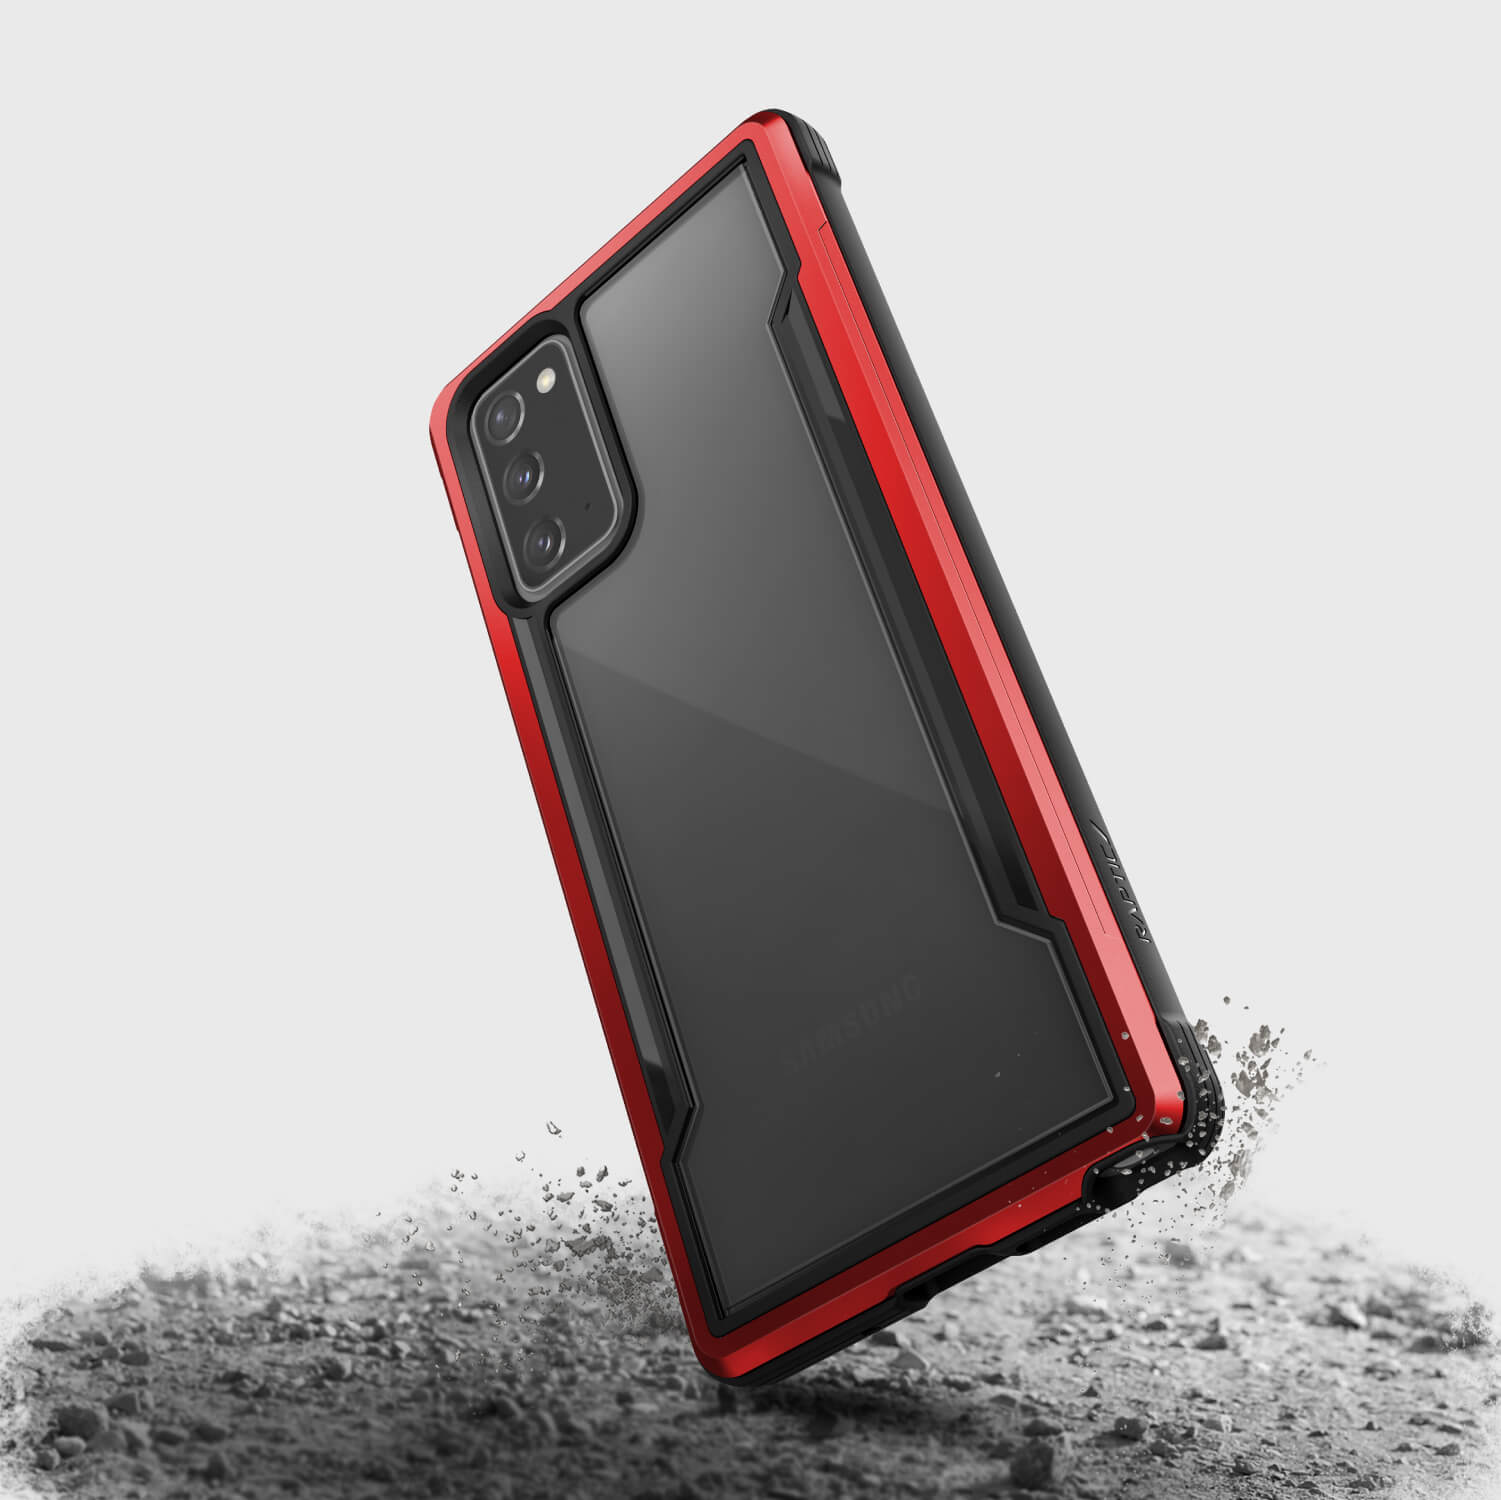 The X-Doria Samsung Galaxy Note 20 Case - SHIELD Red provides military-grade drop protection against drops on concrete and comes with free shipping.